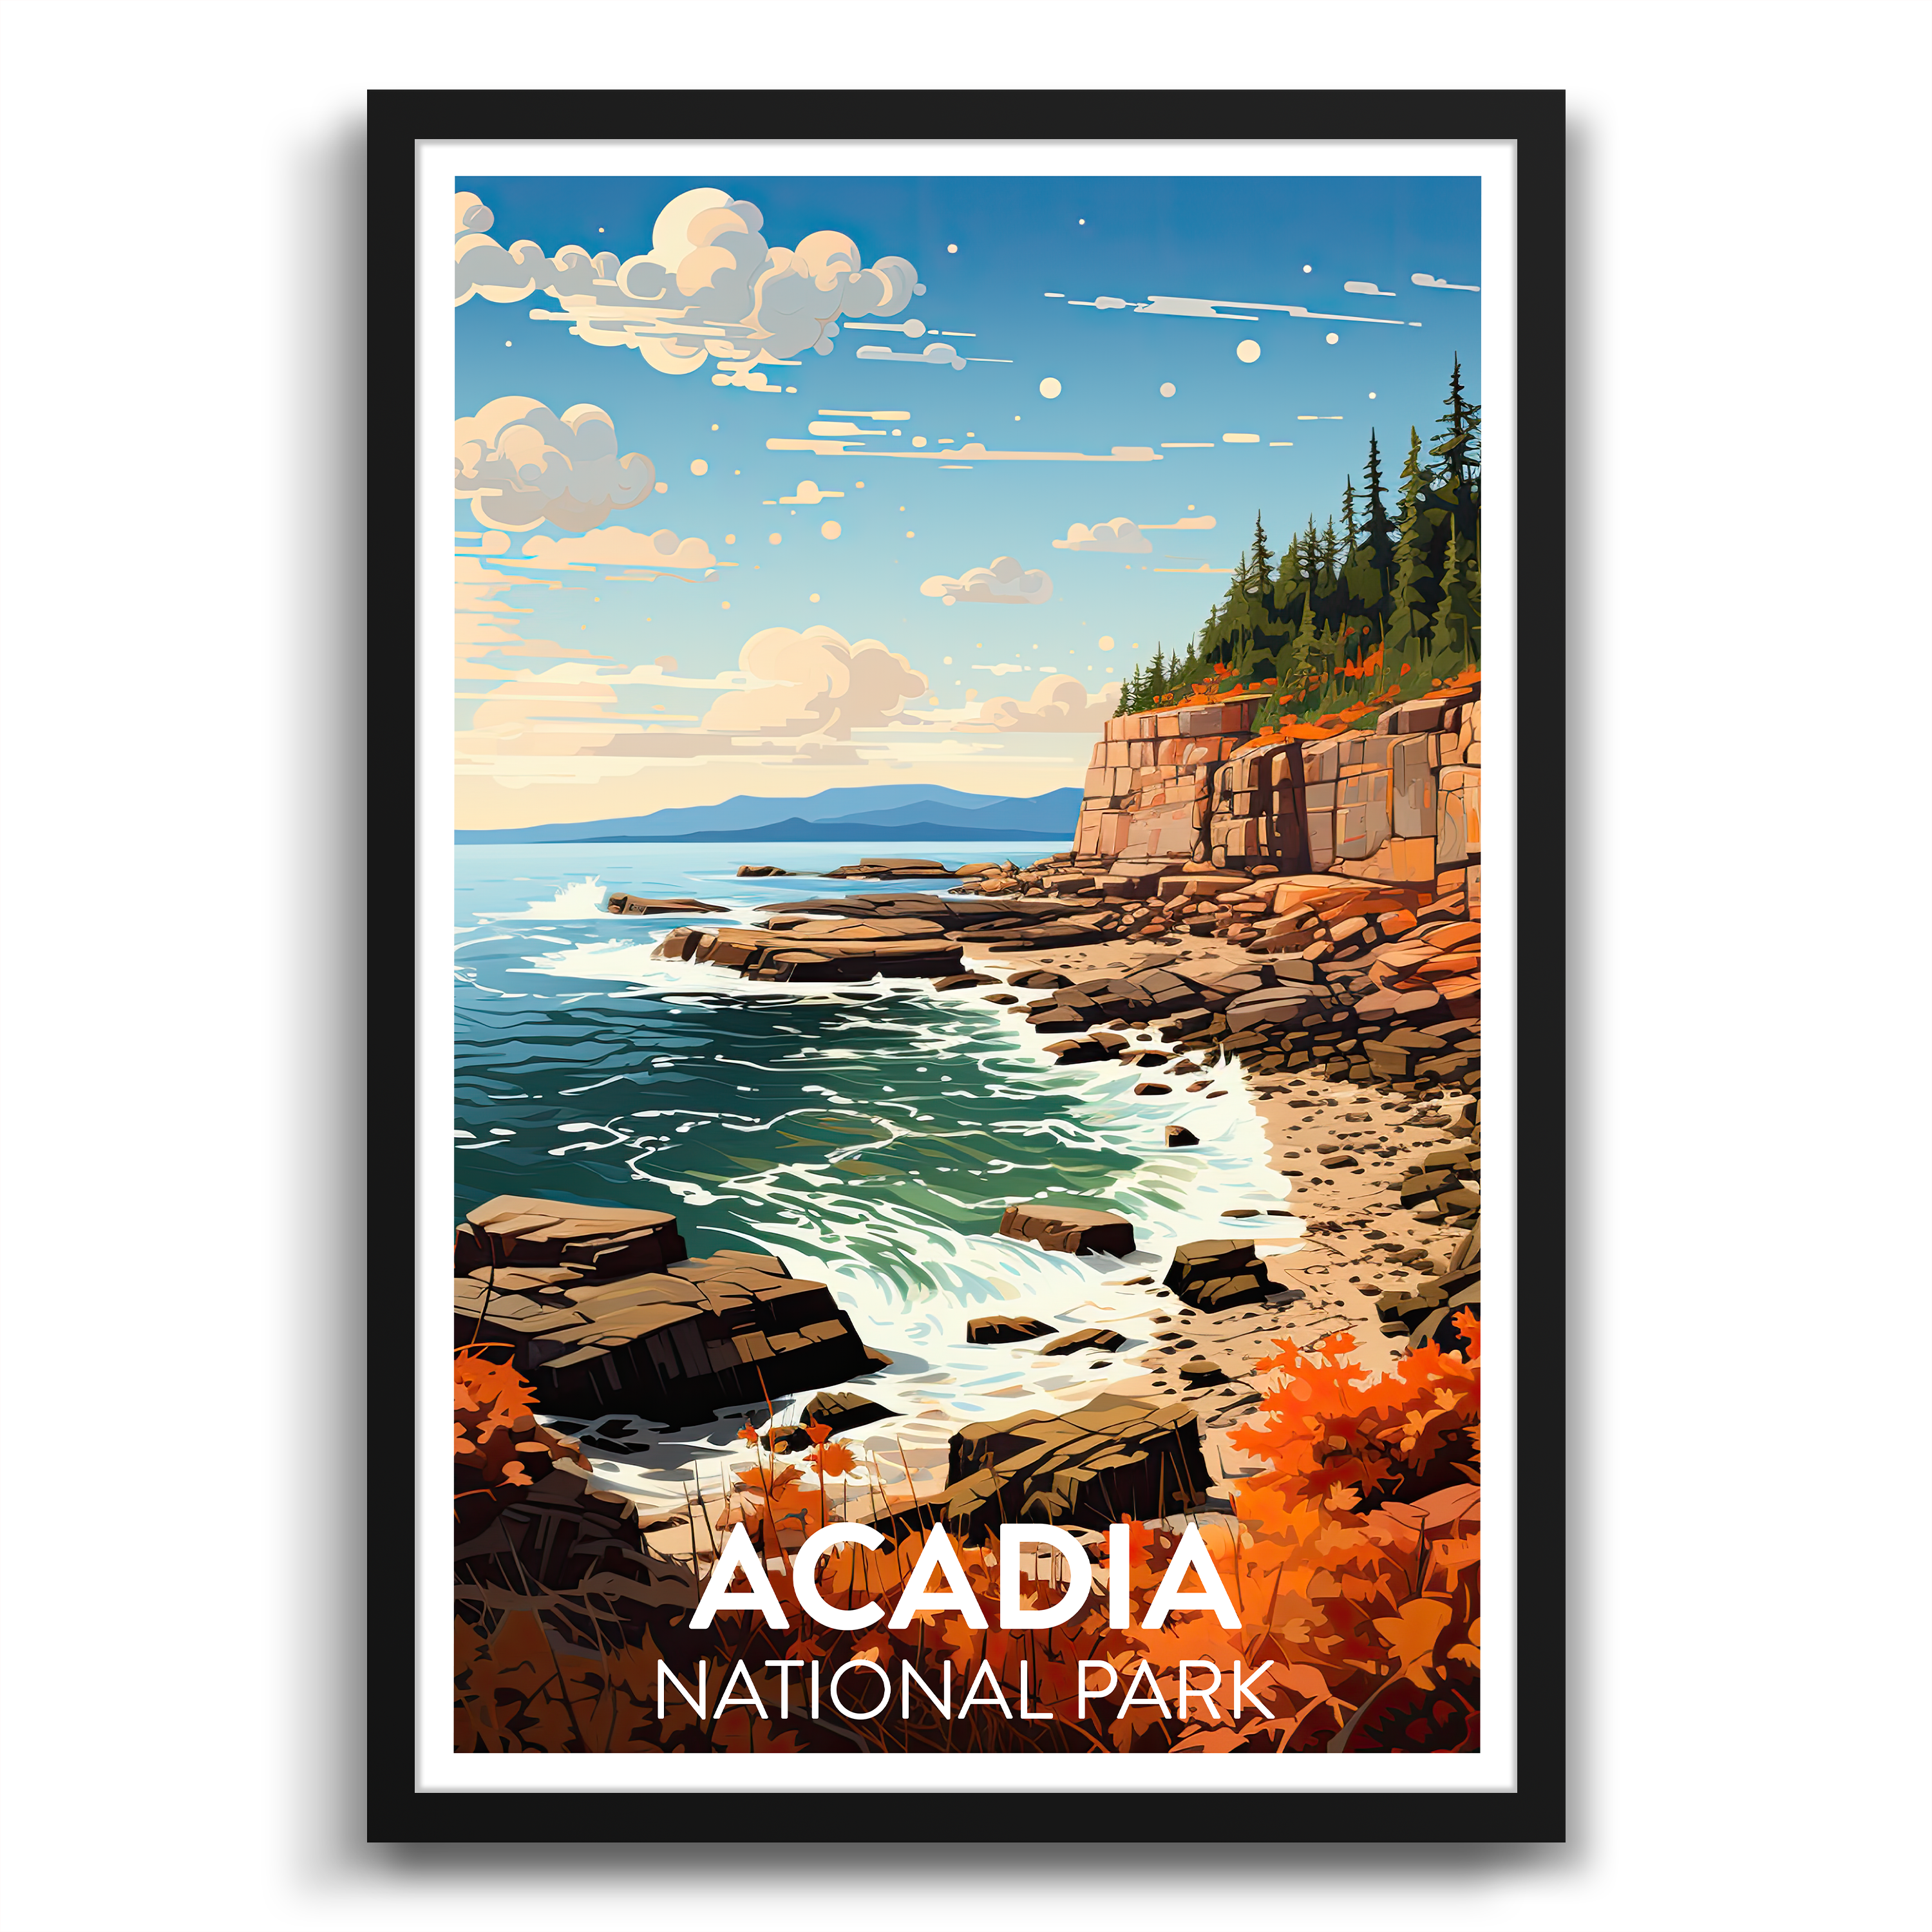 poster showing the rocky shores at Acadia national park